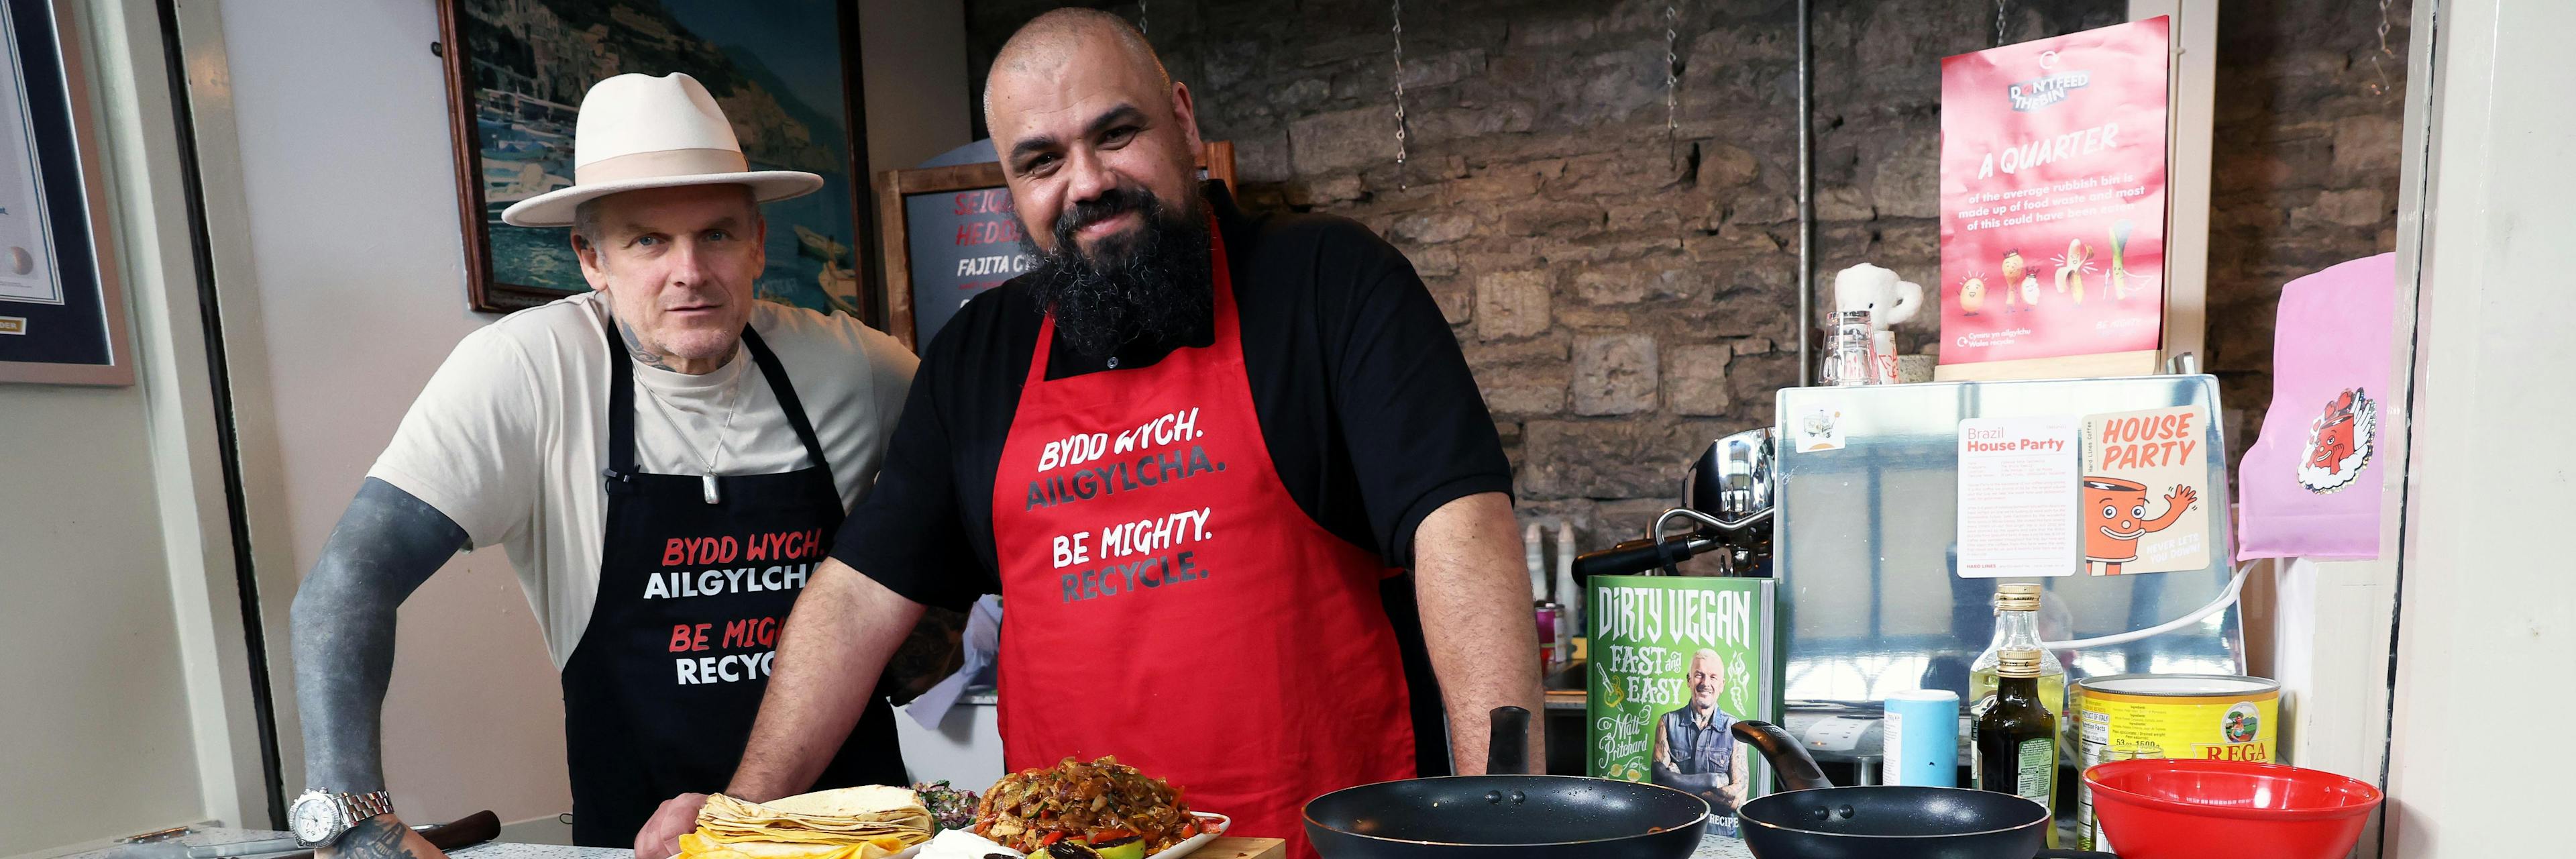 Dirty Vegan Matt Pritchard and Chris ‘Flamebaster’ Roberts launch new Be Mighty. Recycle drive to cut £786 million food waste bill in Wales